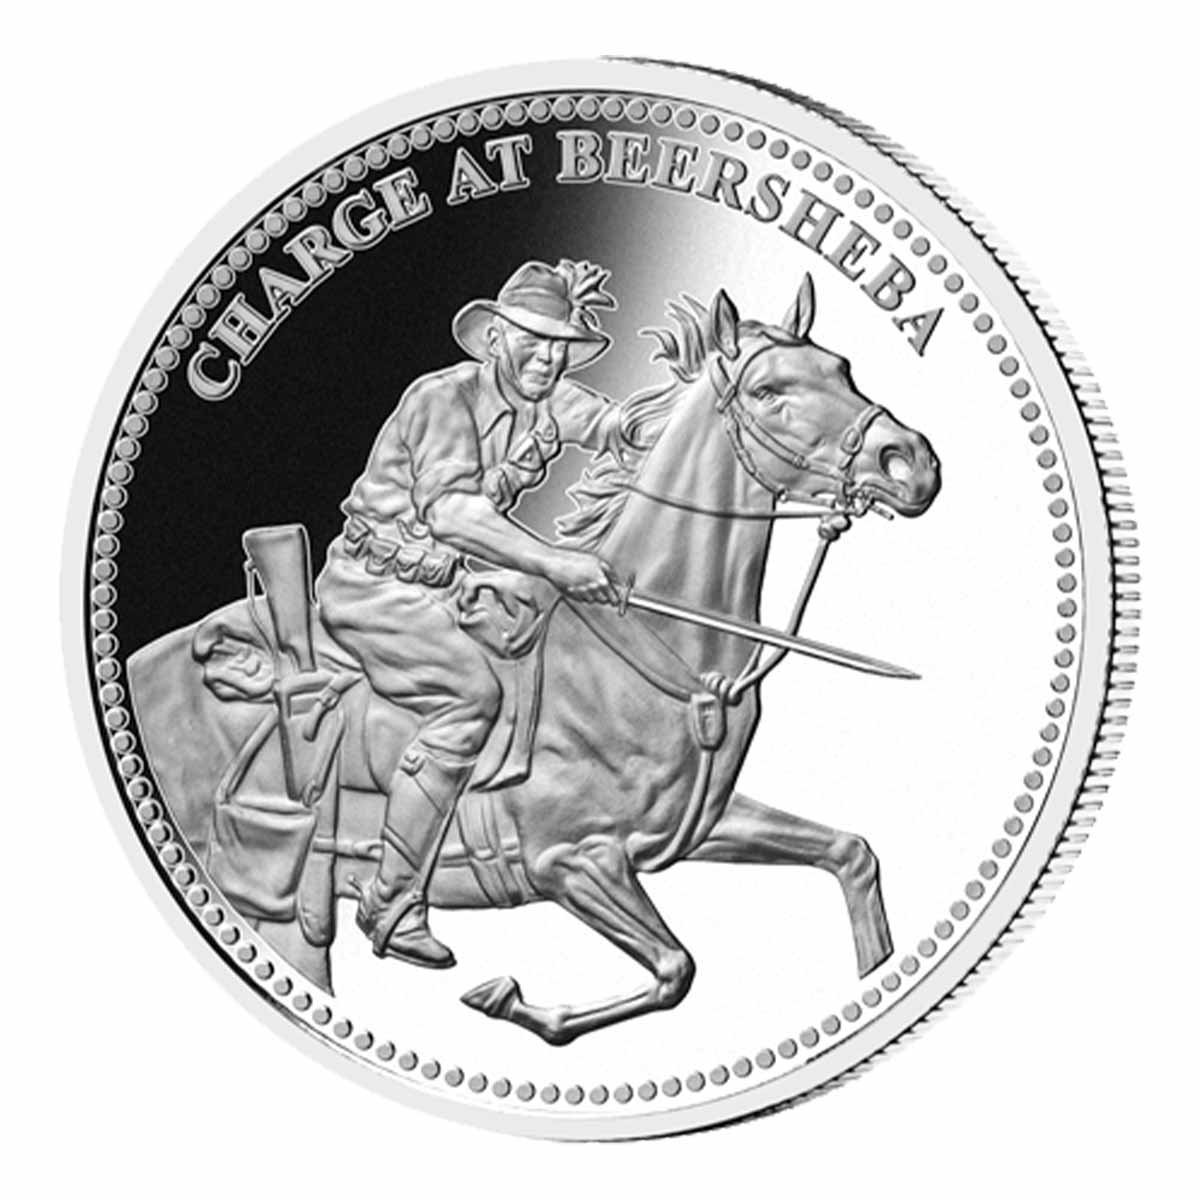 First World War Charge at Beersheba Silver Prooflike Commemorative